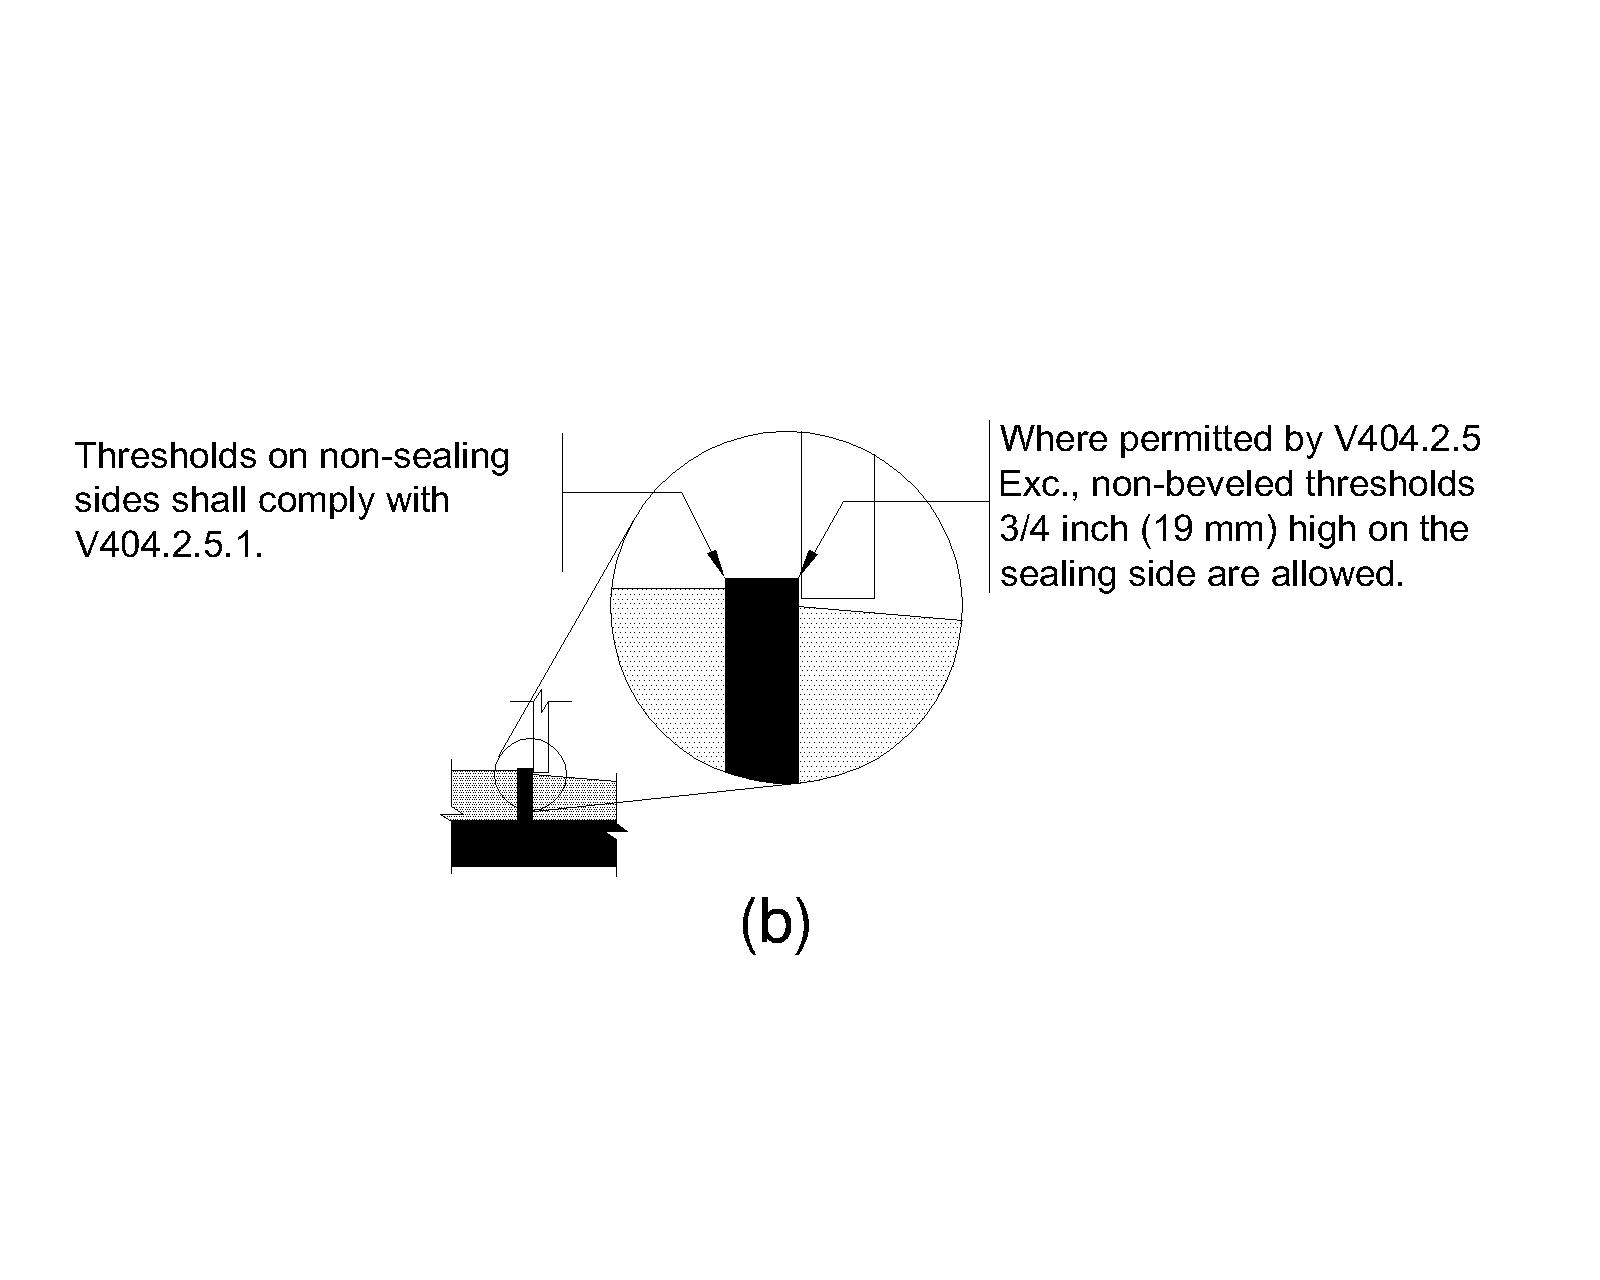 The figure shows an elevation view of a threshold at a door with single ramp access. On the right side of the threshold, a ramp leads up to the threshold and ends ¾ inches (19 mm) below the threshold top. A door is shown sealing against this ¾ inch (19 mm) threshold. A statement is included which says “where permitted by V404.2.5 Exception, non-beveled thresholds ¾ inch (19 mm) high on the sealing side are allowed”. On the left side of the threshold, a ½ inch (13 mm) high beveled threshold is shown. A statement is included which says “thresholds on non-sealing sides shall comply with V404.2.5.1”.